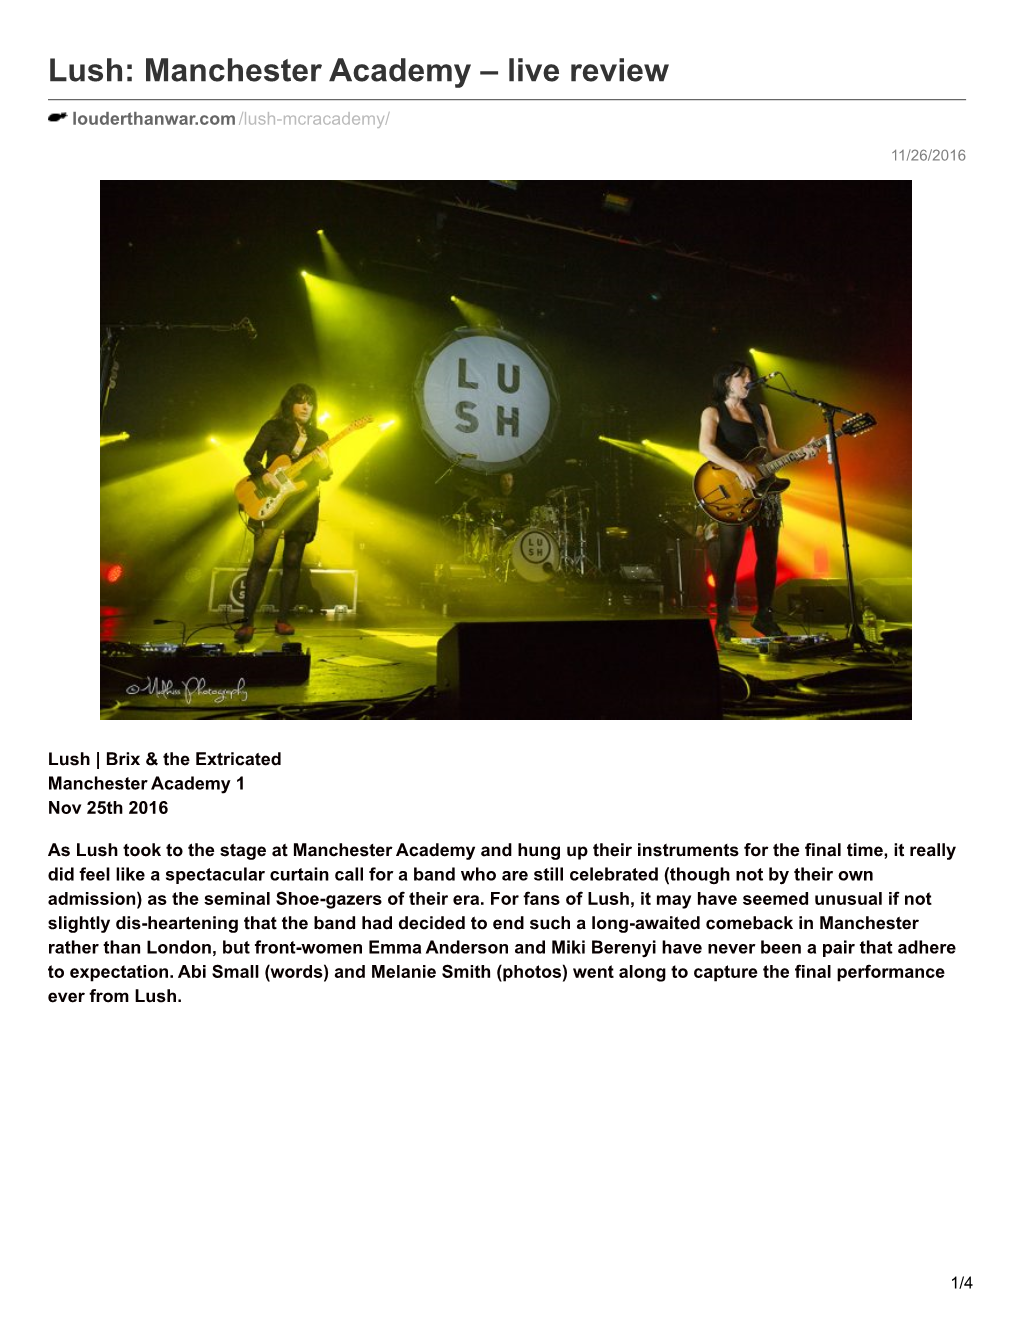 Lush: Manchester Academy – Live Review